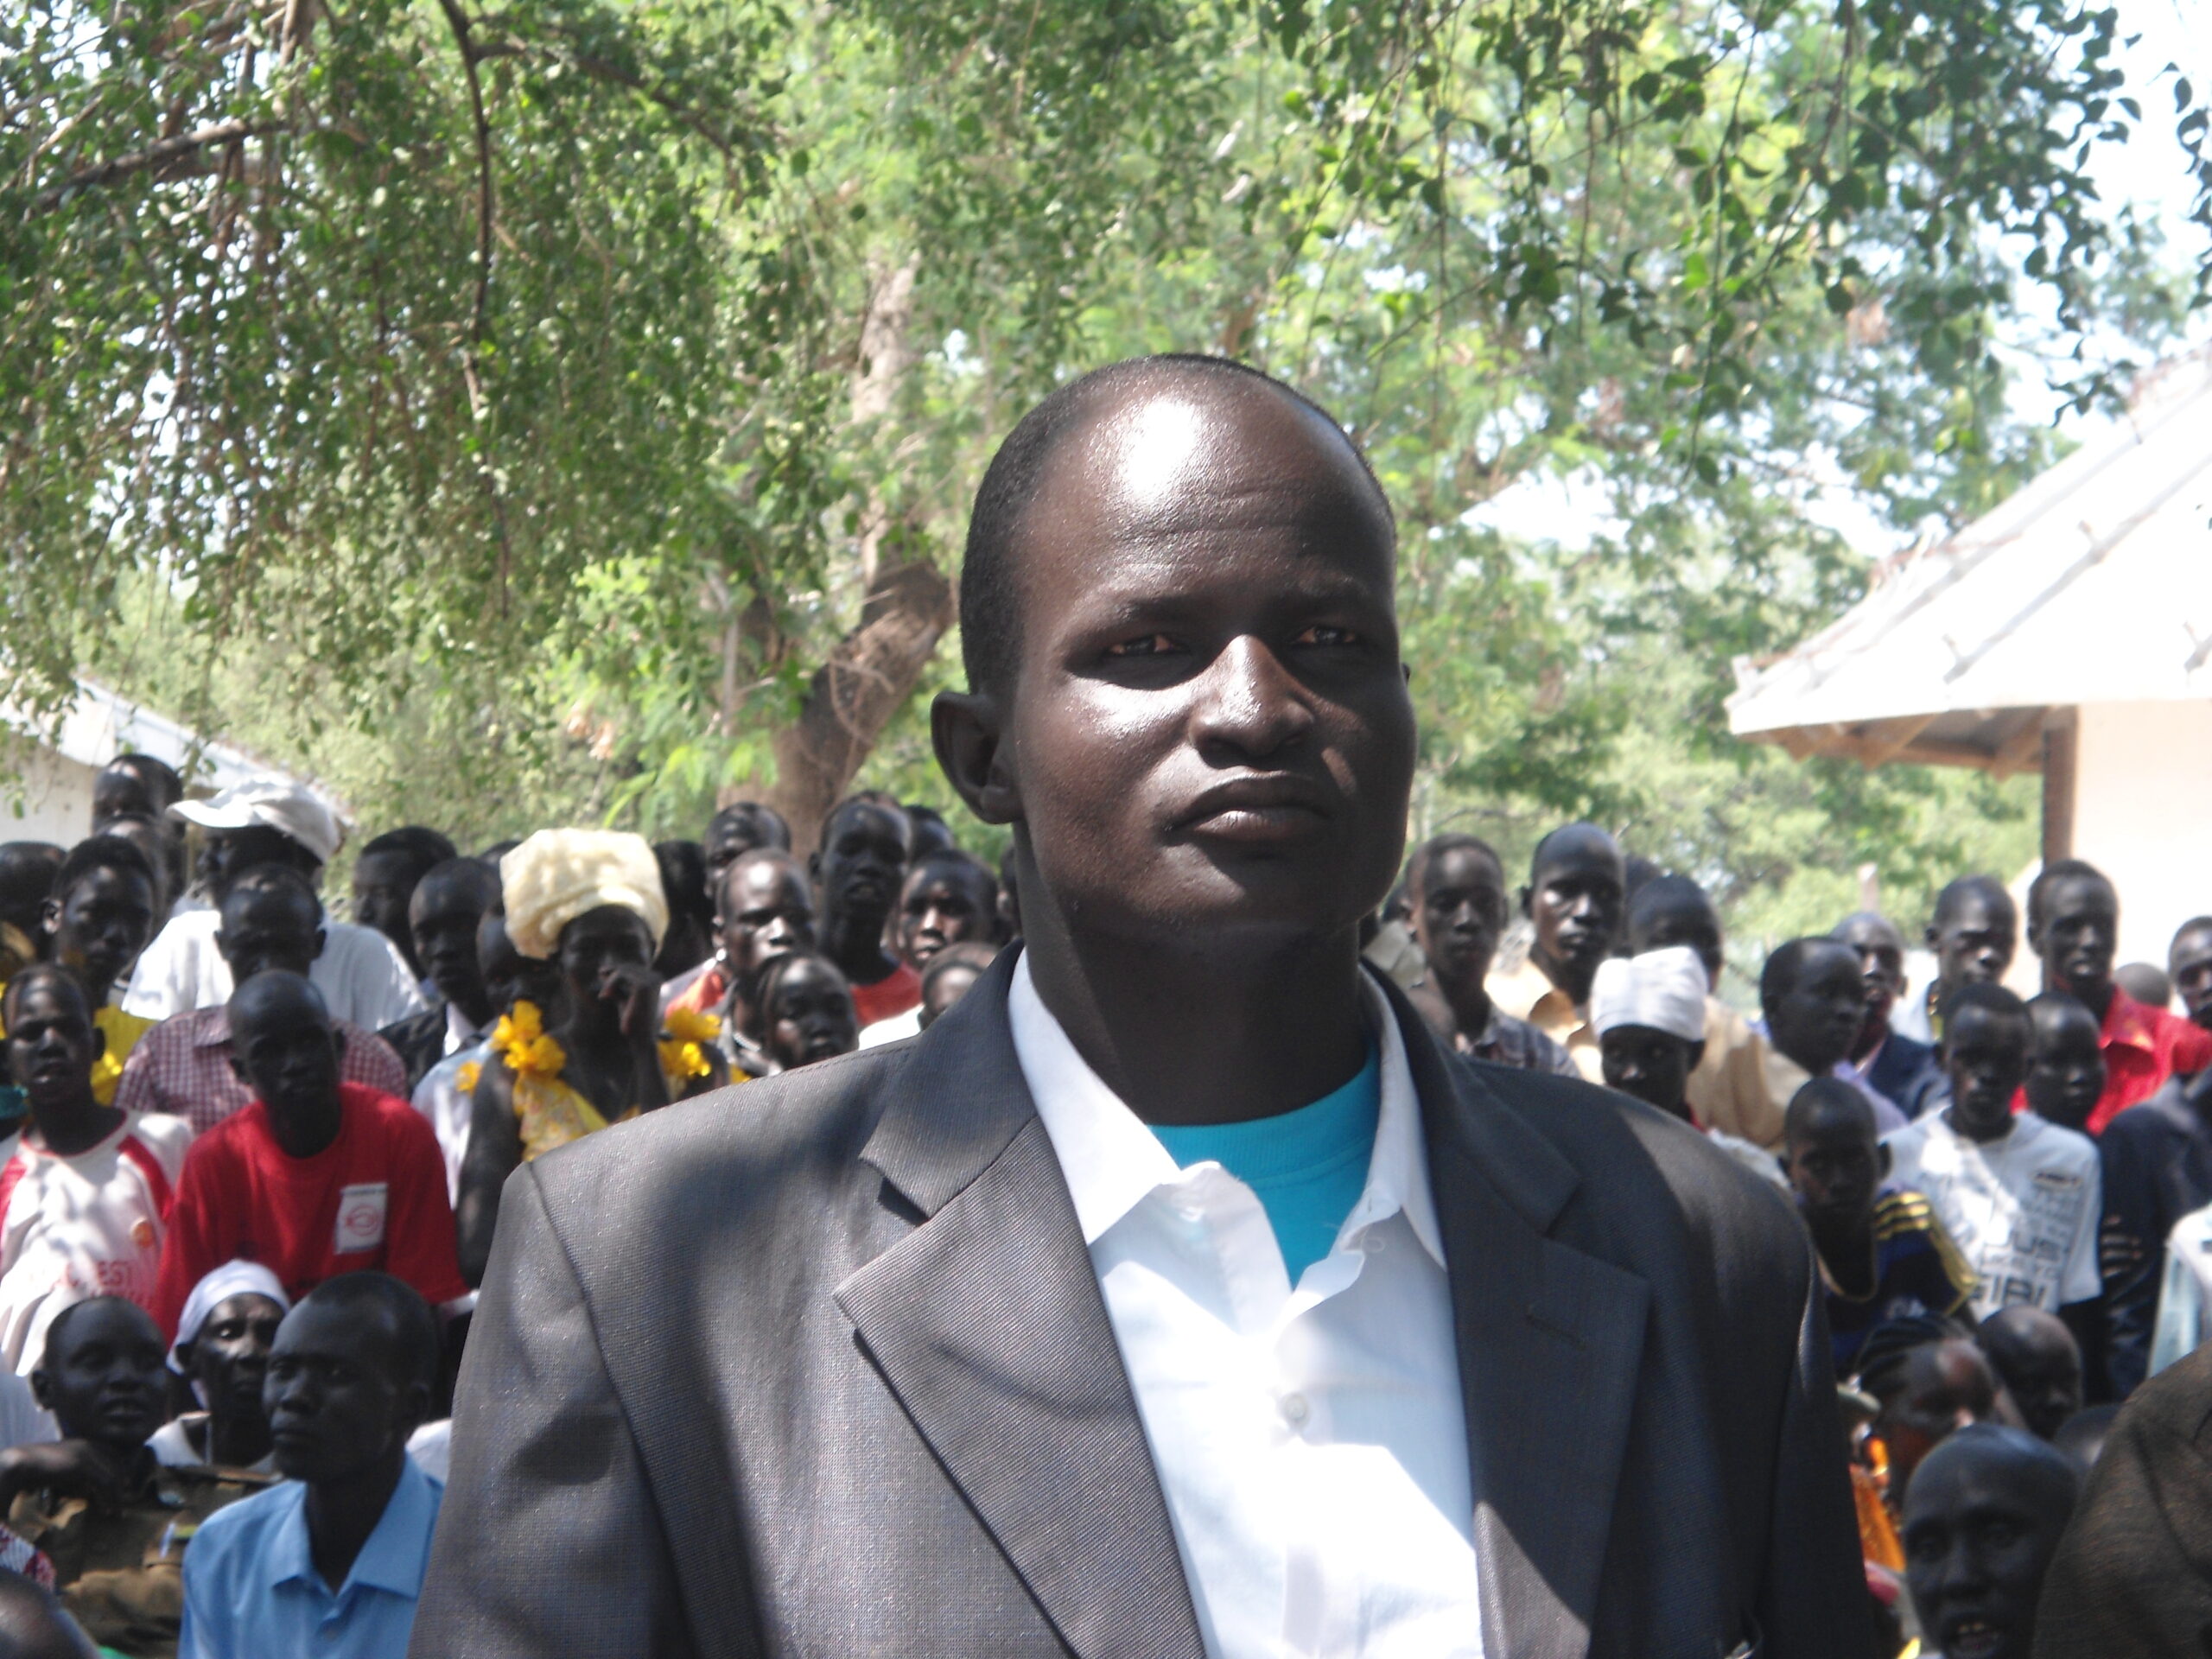 Awai Piok Deng, the youth leader of Twic East adddressing the people at the independence rally at Panyagoor, Jonglei State, South Sudan, 9 July 2012 (ST)